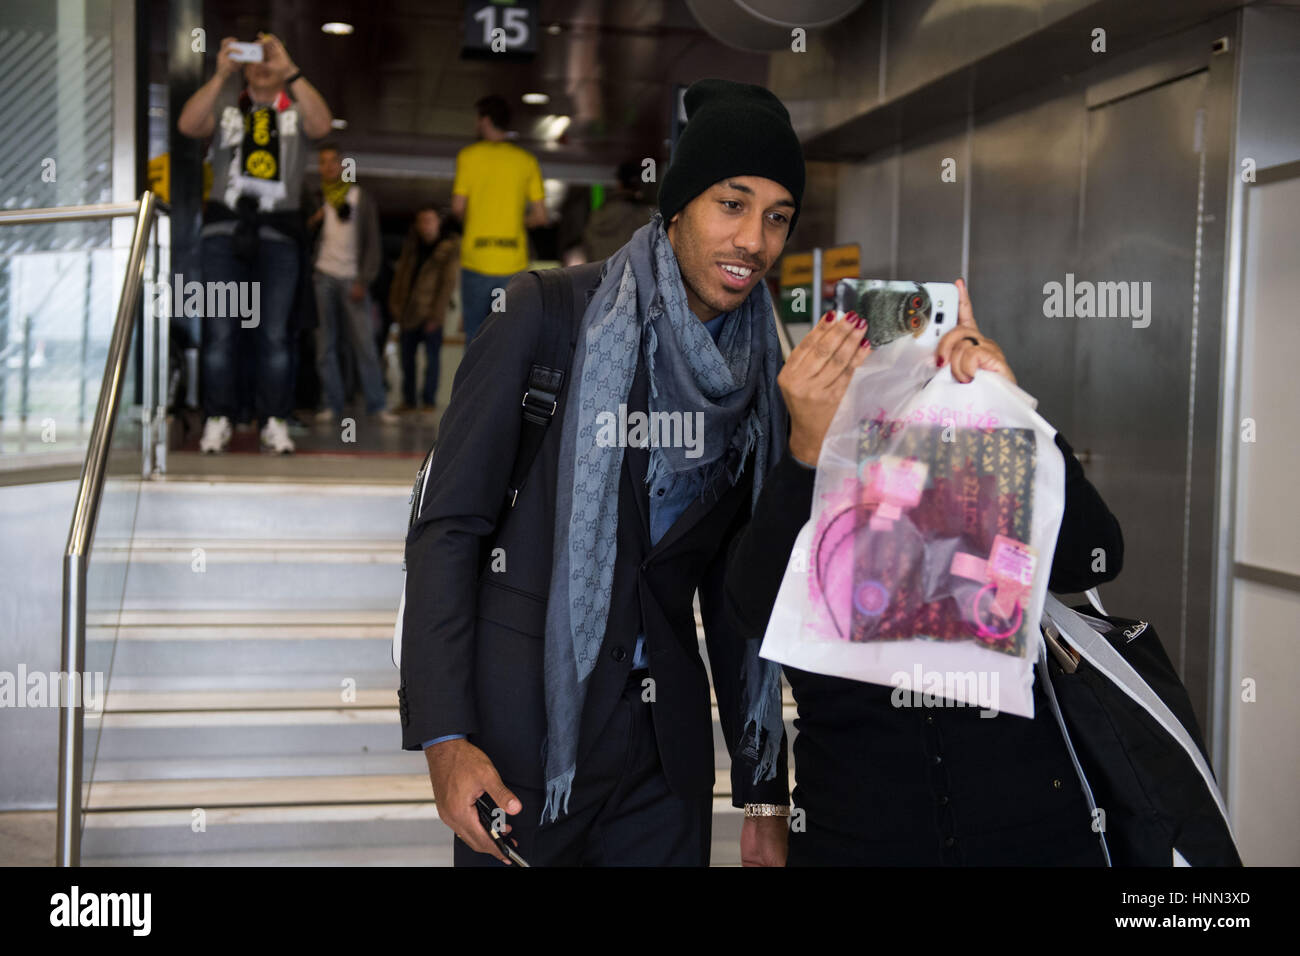 Lisbon, Portugal. 15th Feb, 2017. Borussia Dortmund player Pierre-Emerick Aubameyang takes a picture with a fan while waiting for the return flight at the airport in Lisbon, Portugal, 15 February 2017. BVB were defeated in the round of 16 soccer Champions Legaue match by S.L. Benfica. Photo: Bernd Thissen/dpa/Alamy Live News Stock Photo